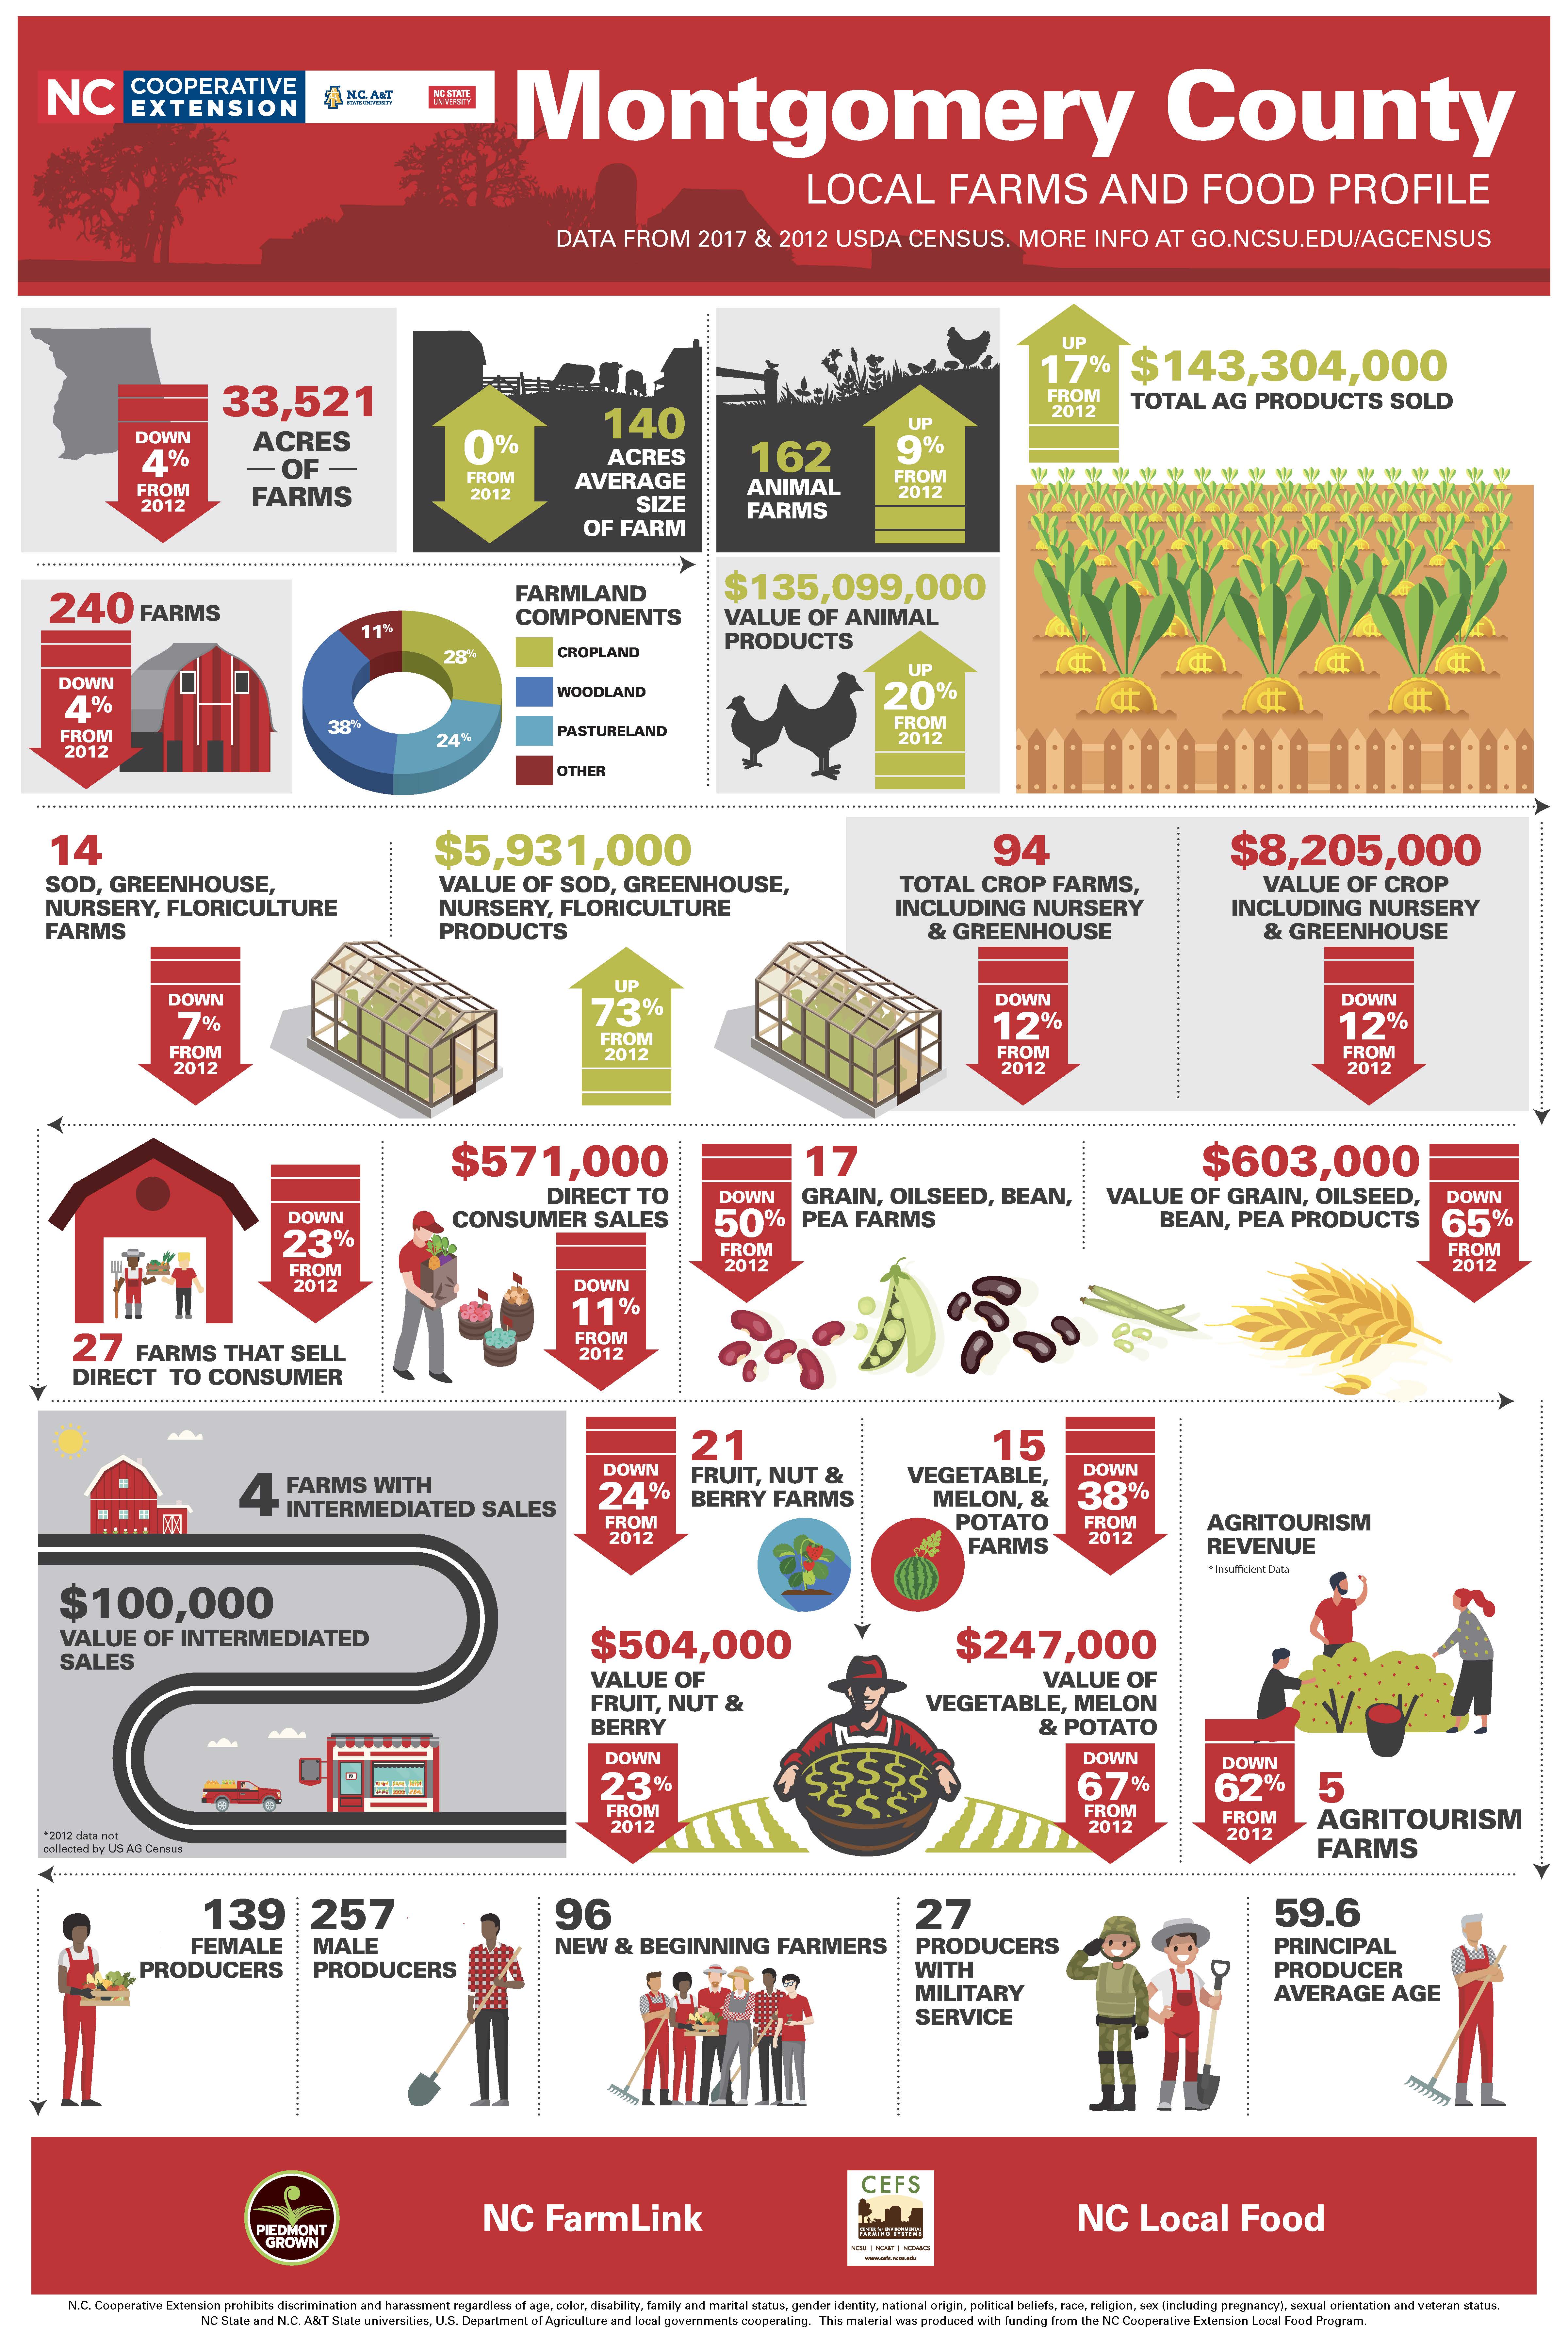 Local Farms and Food Profile Infographic